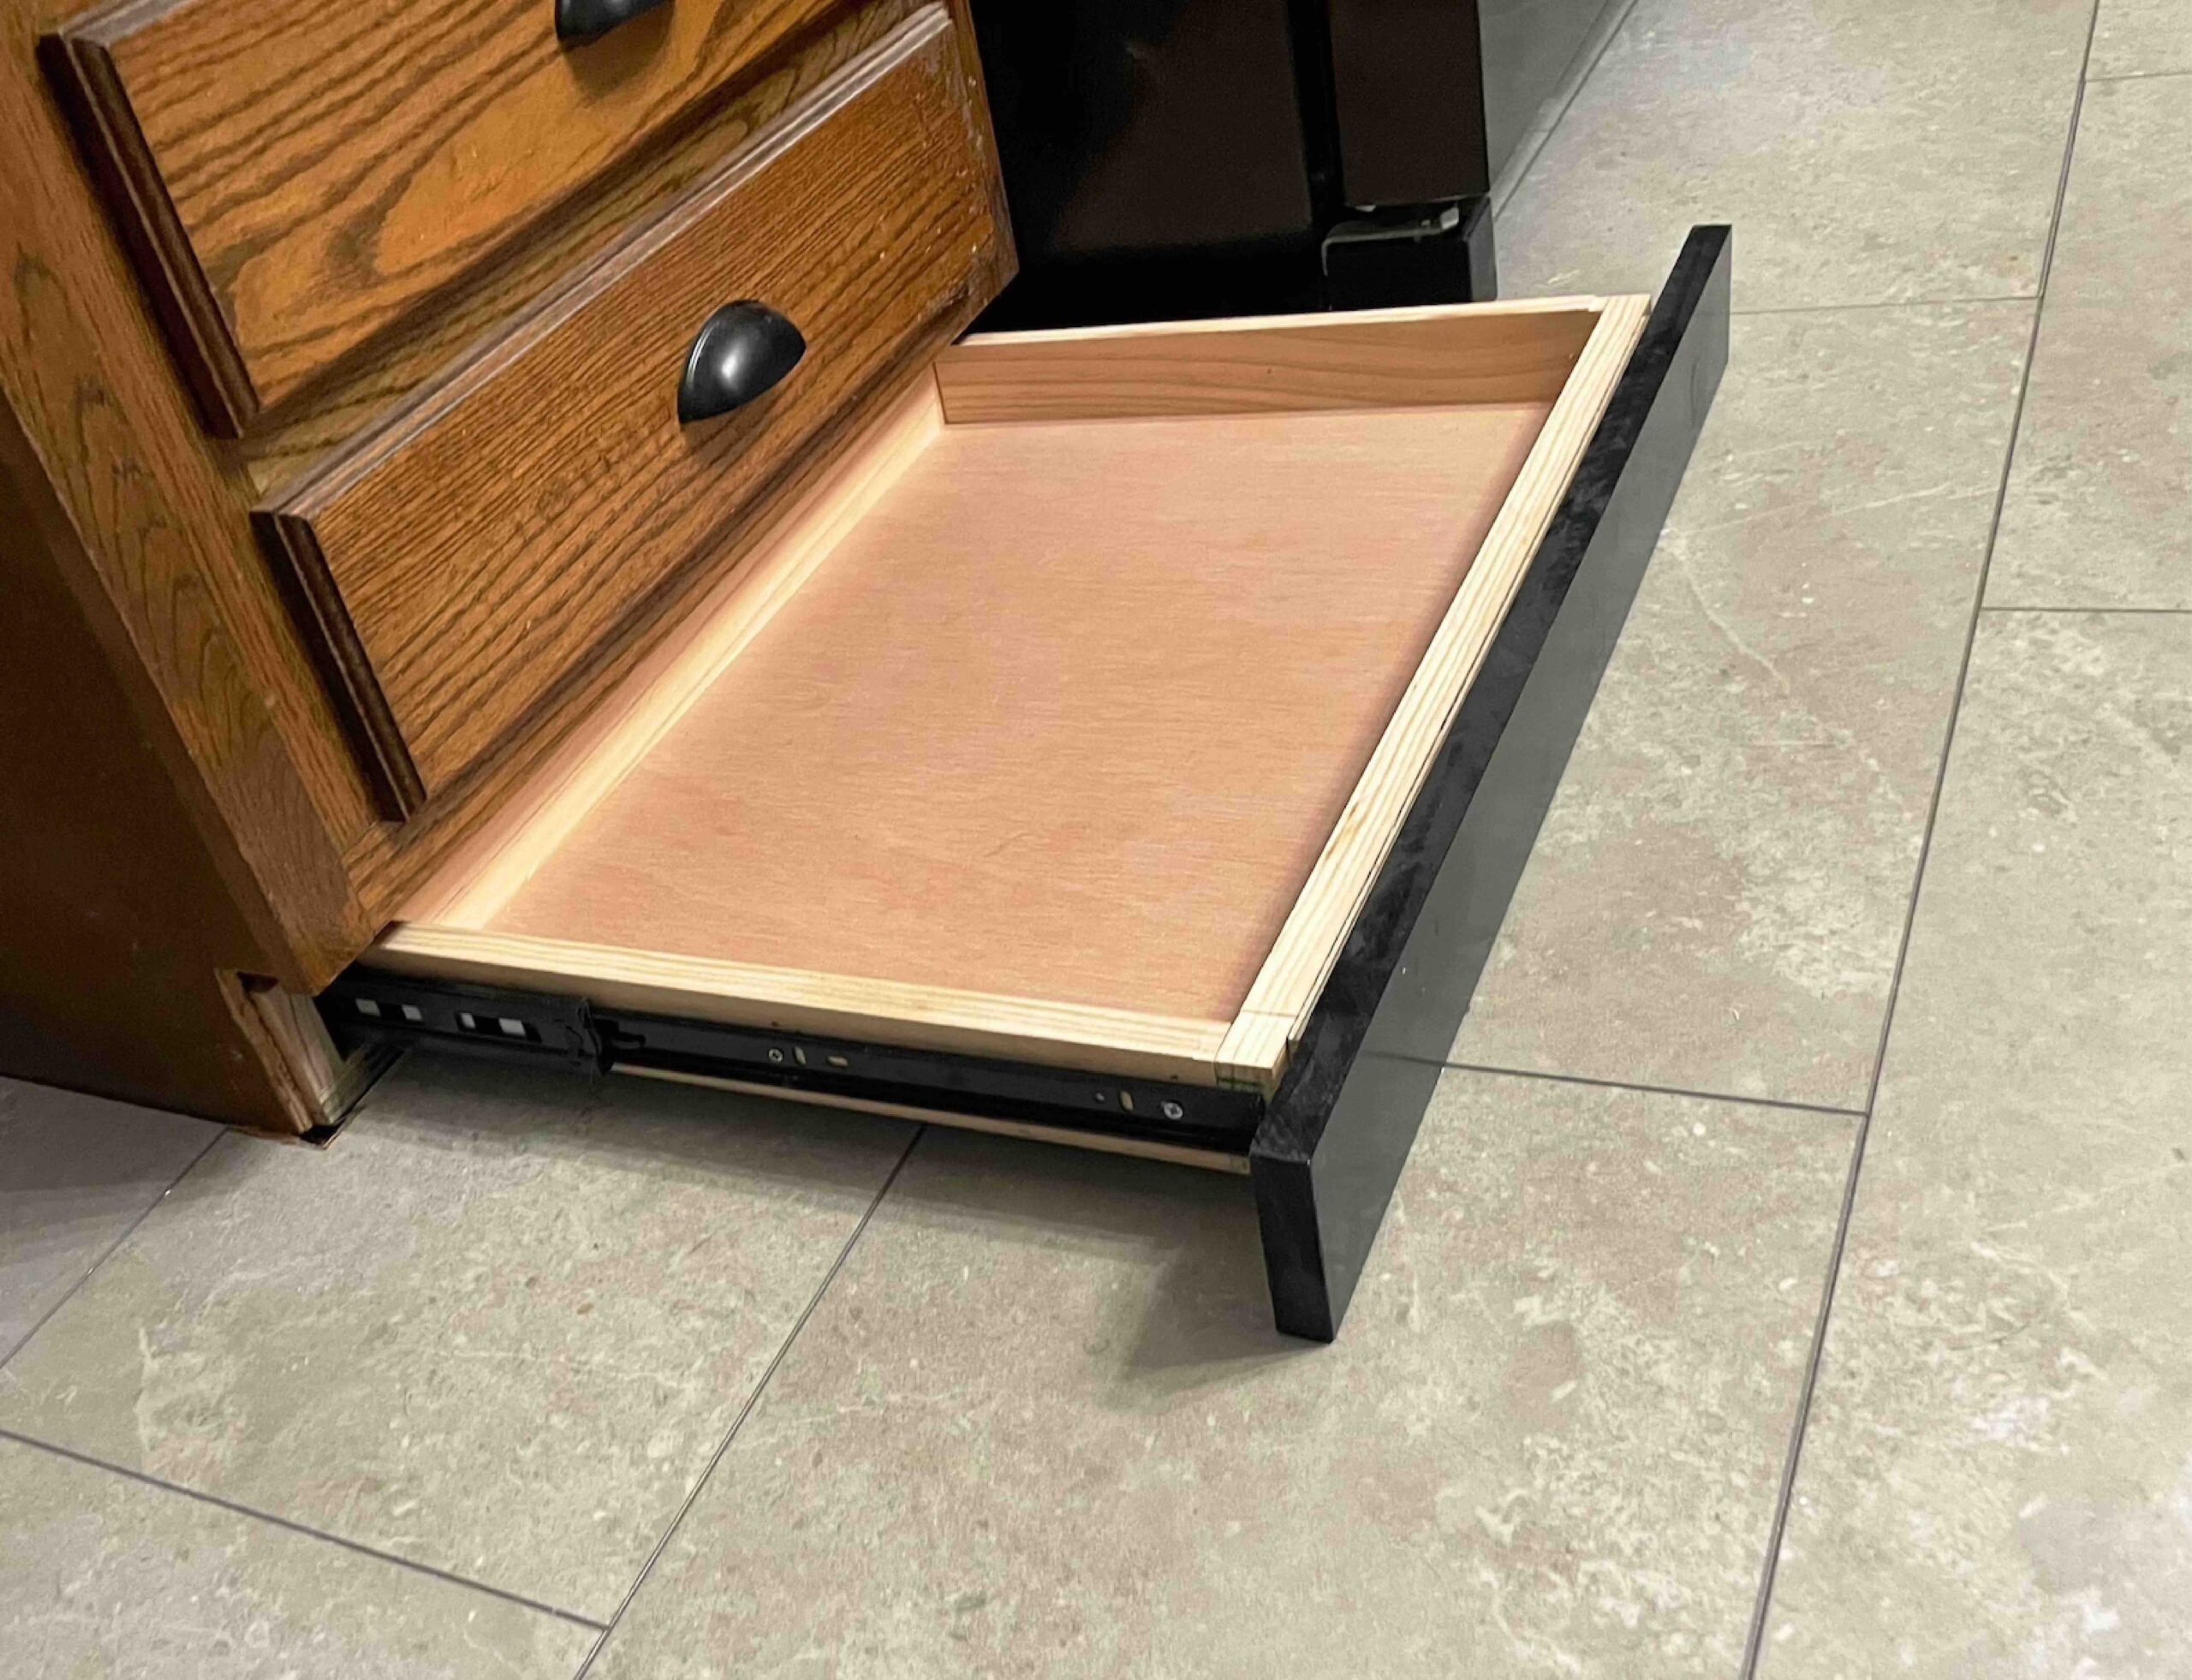 Bottom drawer open in a toe kick drawer system